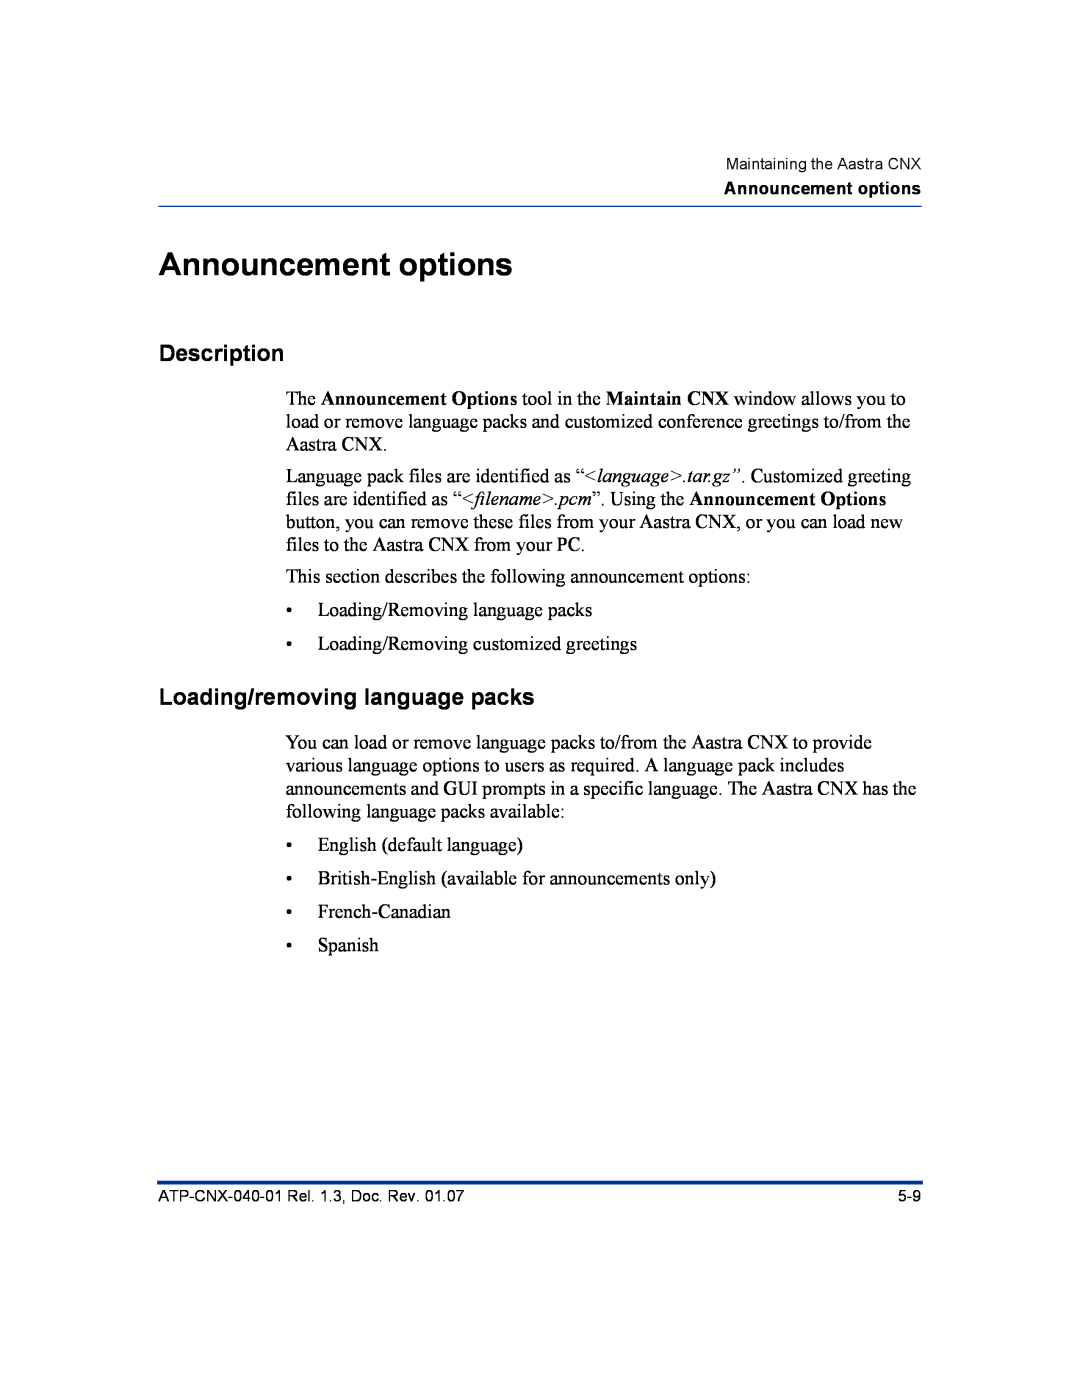 Aastra Telecom ATP-CNX-040-01 manual Announcement options, Loading/removing language packs, Description 